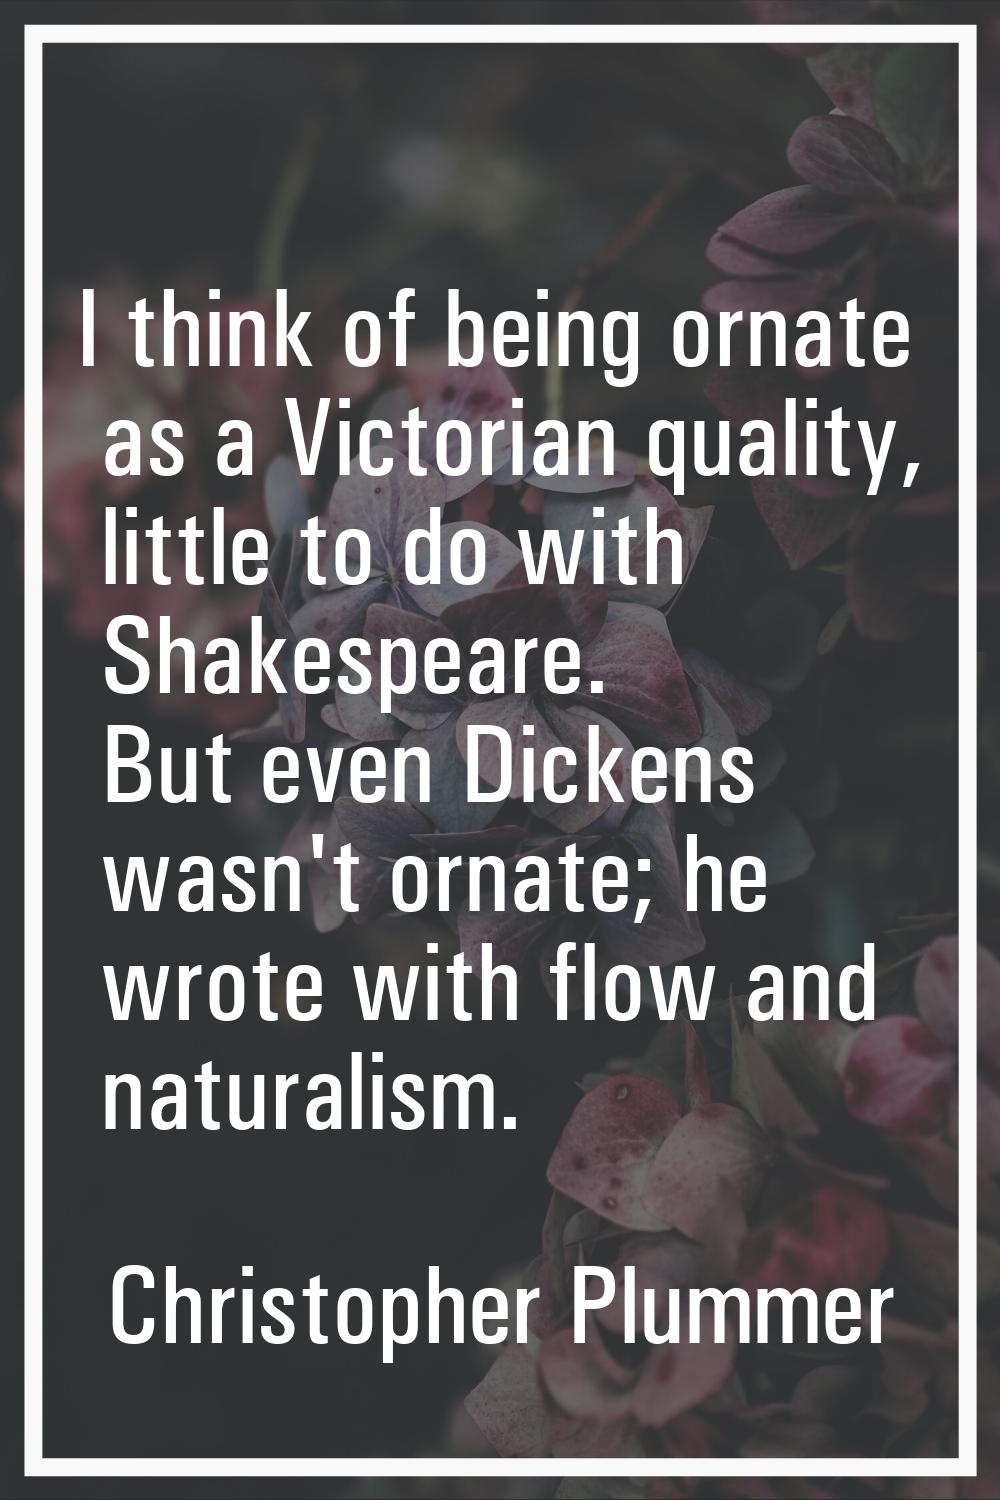 I think of being ornate as a Victorian quality, little to do with Shakespeare. But even Dickens was